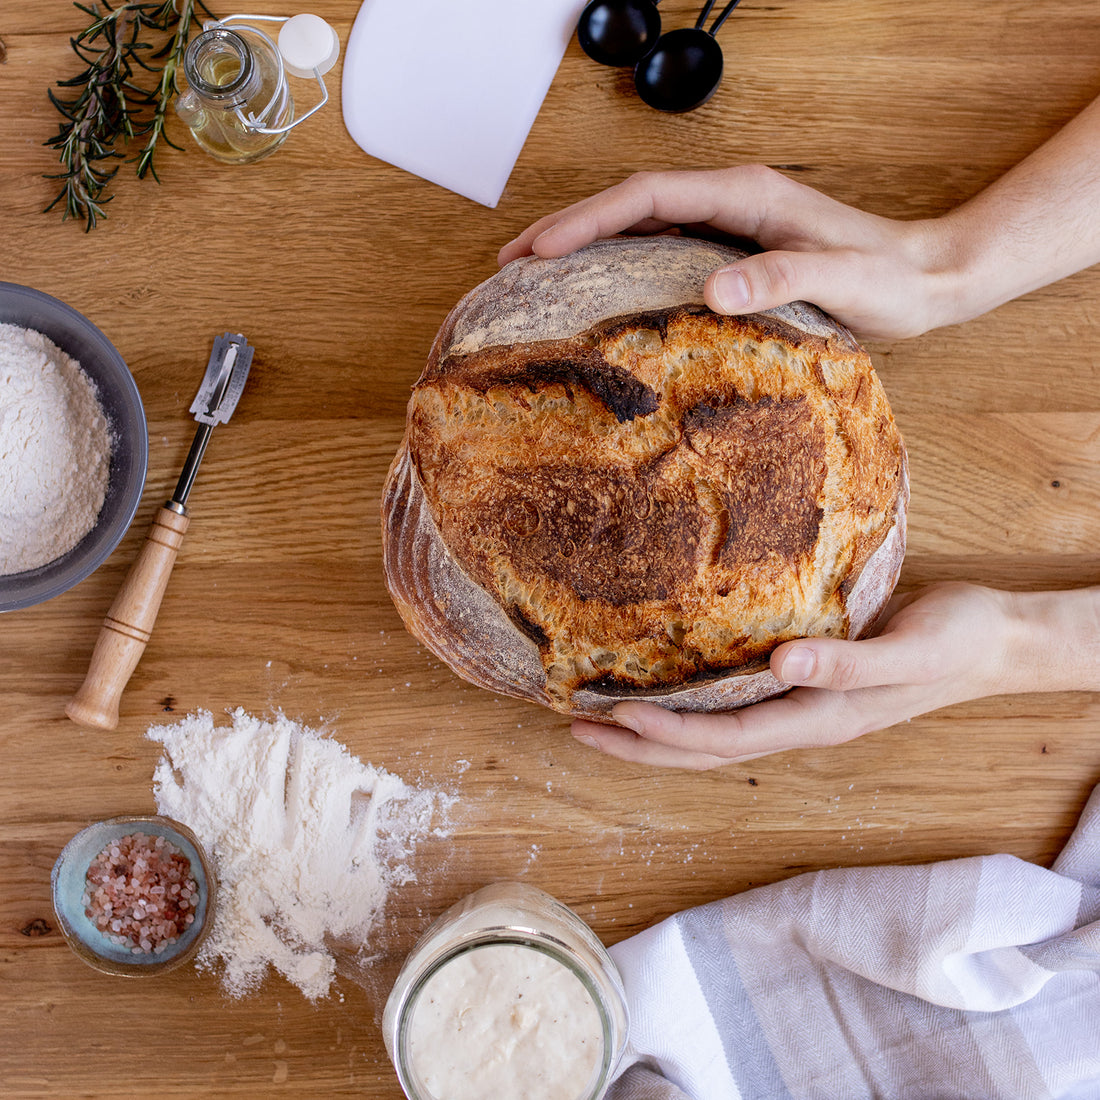 Everything you need to make your own sourdough bread. We ship